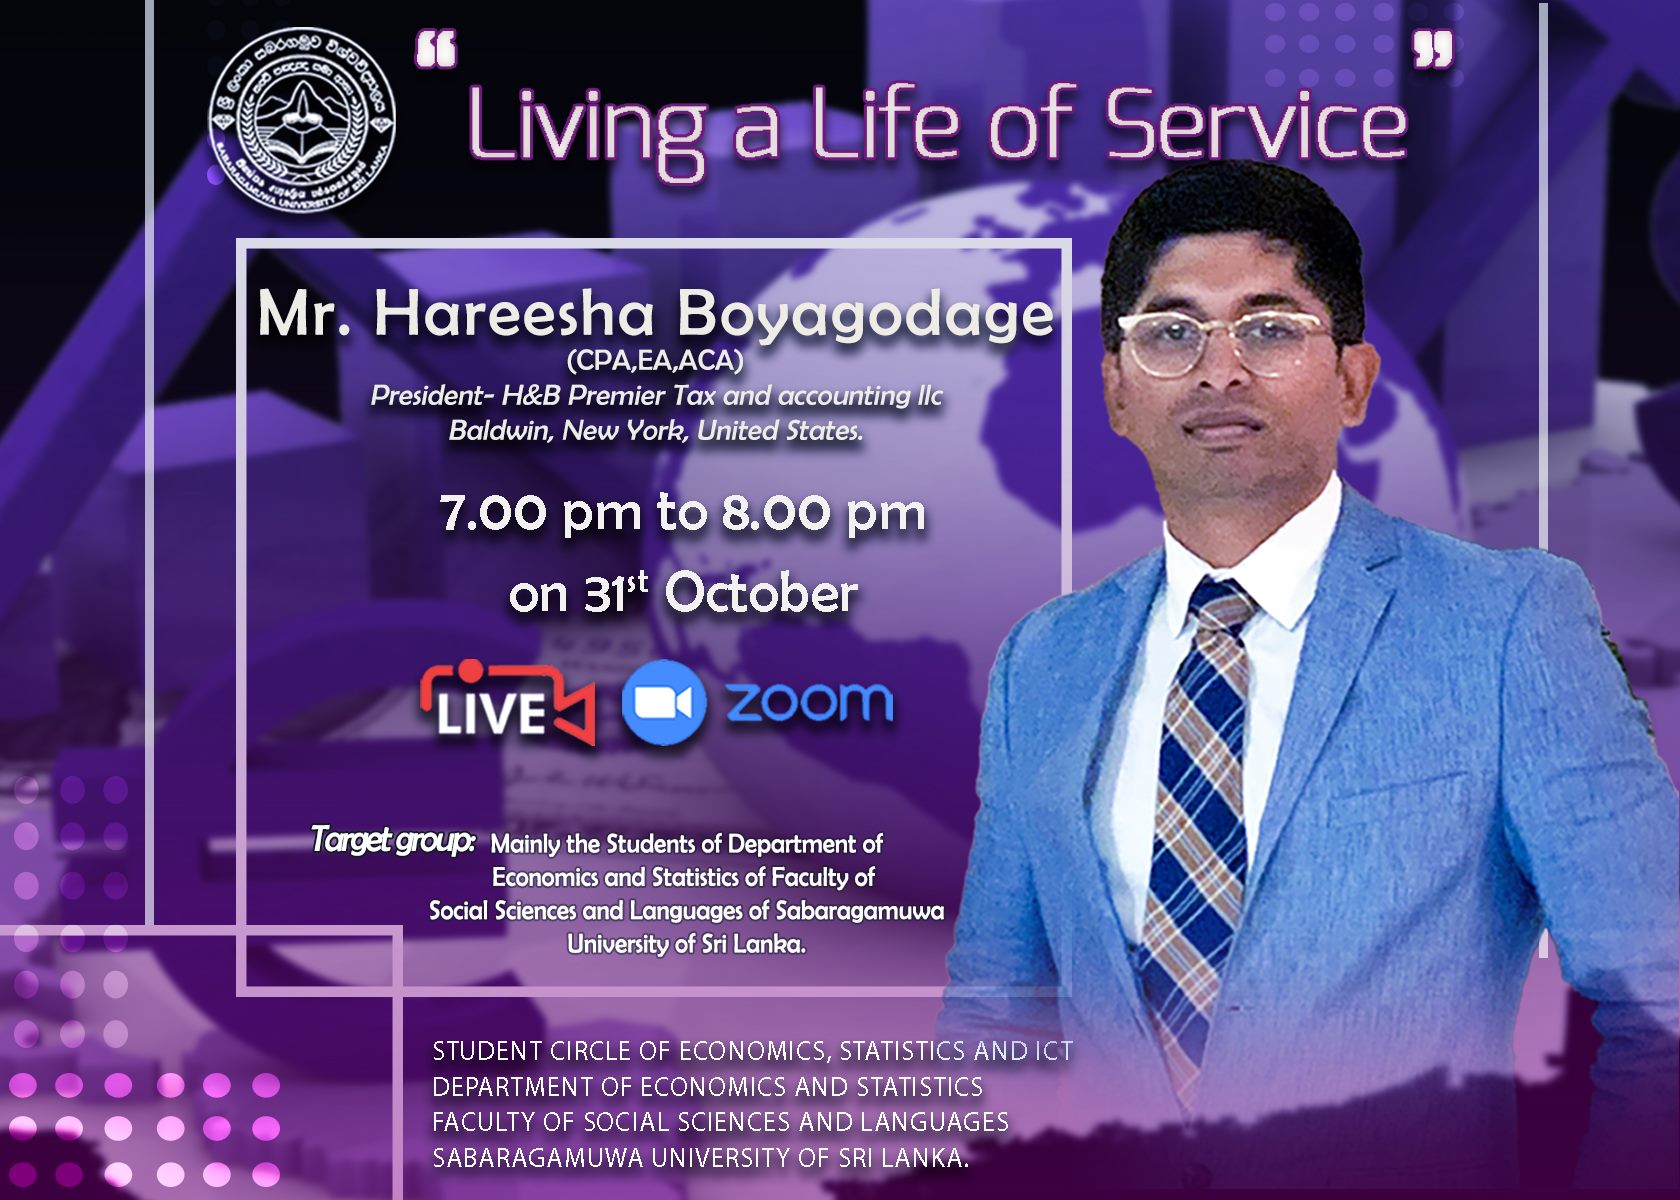 Workshop on LIVING A LIFE OF SERVICE